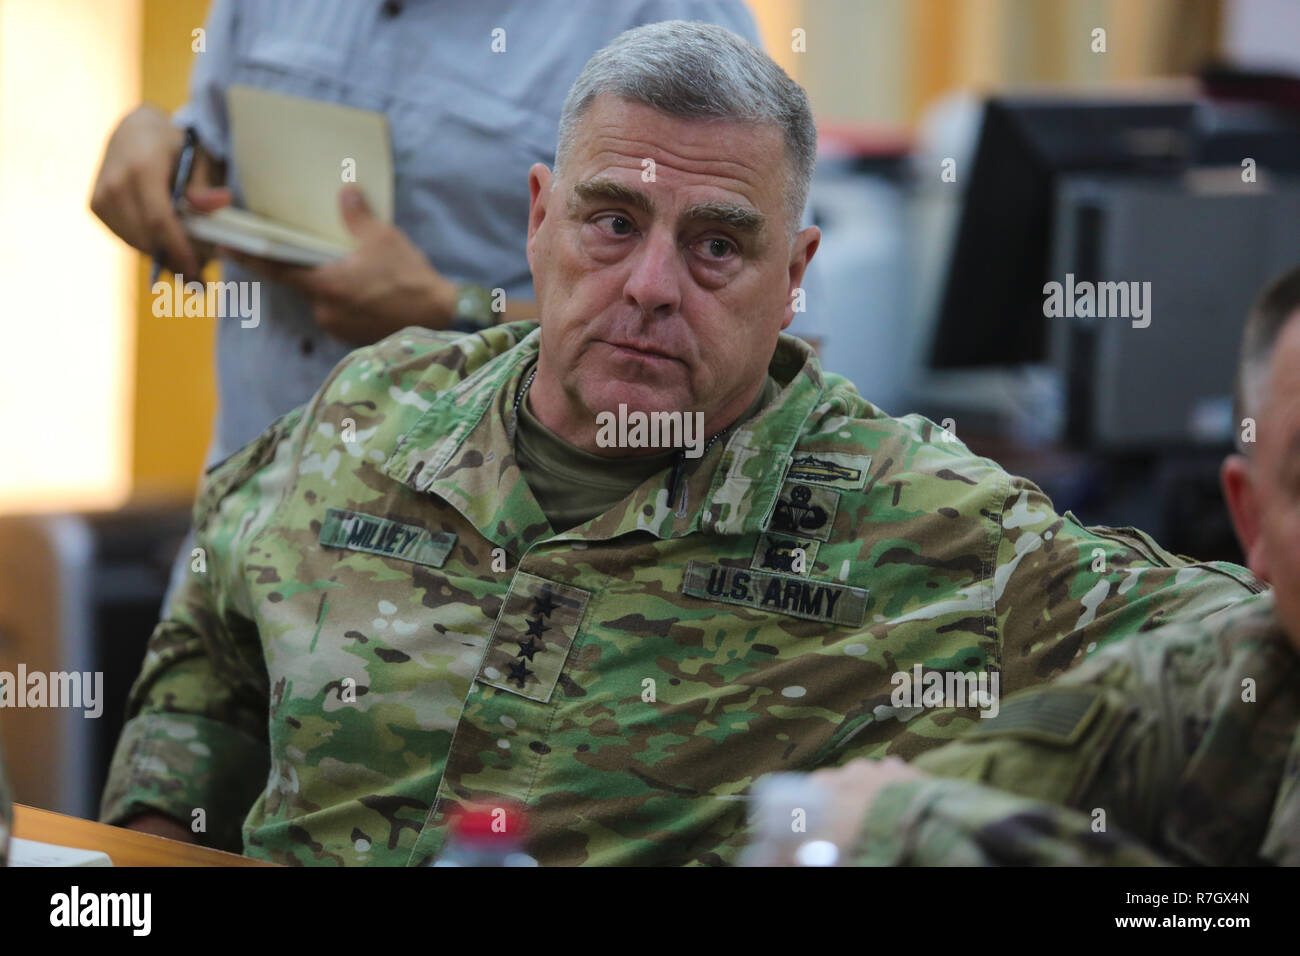 U.S. Army Chief of Staff Gen. Mark Milley during a visit to the Baghdad Operations Center August 15, 2018 in Baghdad, Iraq. Milley was chosen by President Donald Trump on December 8, 2018 to be the next Chairman of the Joint Chiefs. Stock Photo